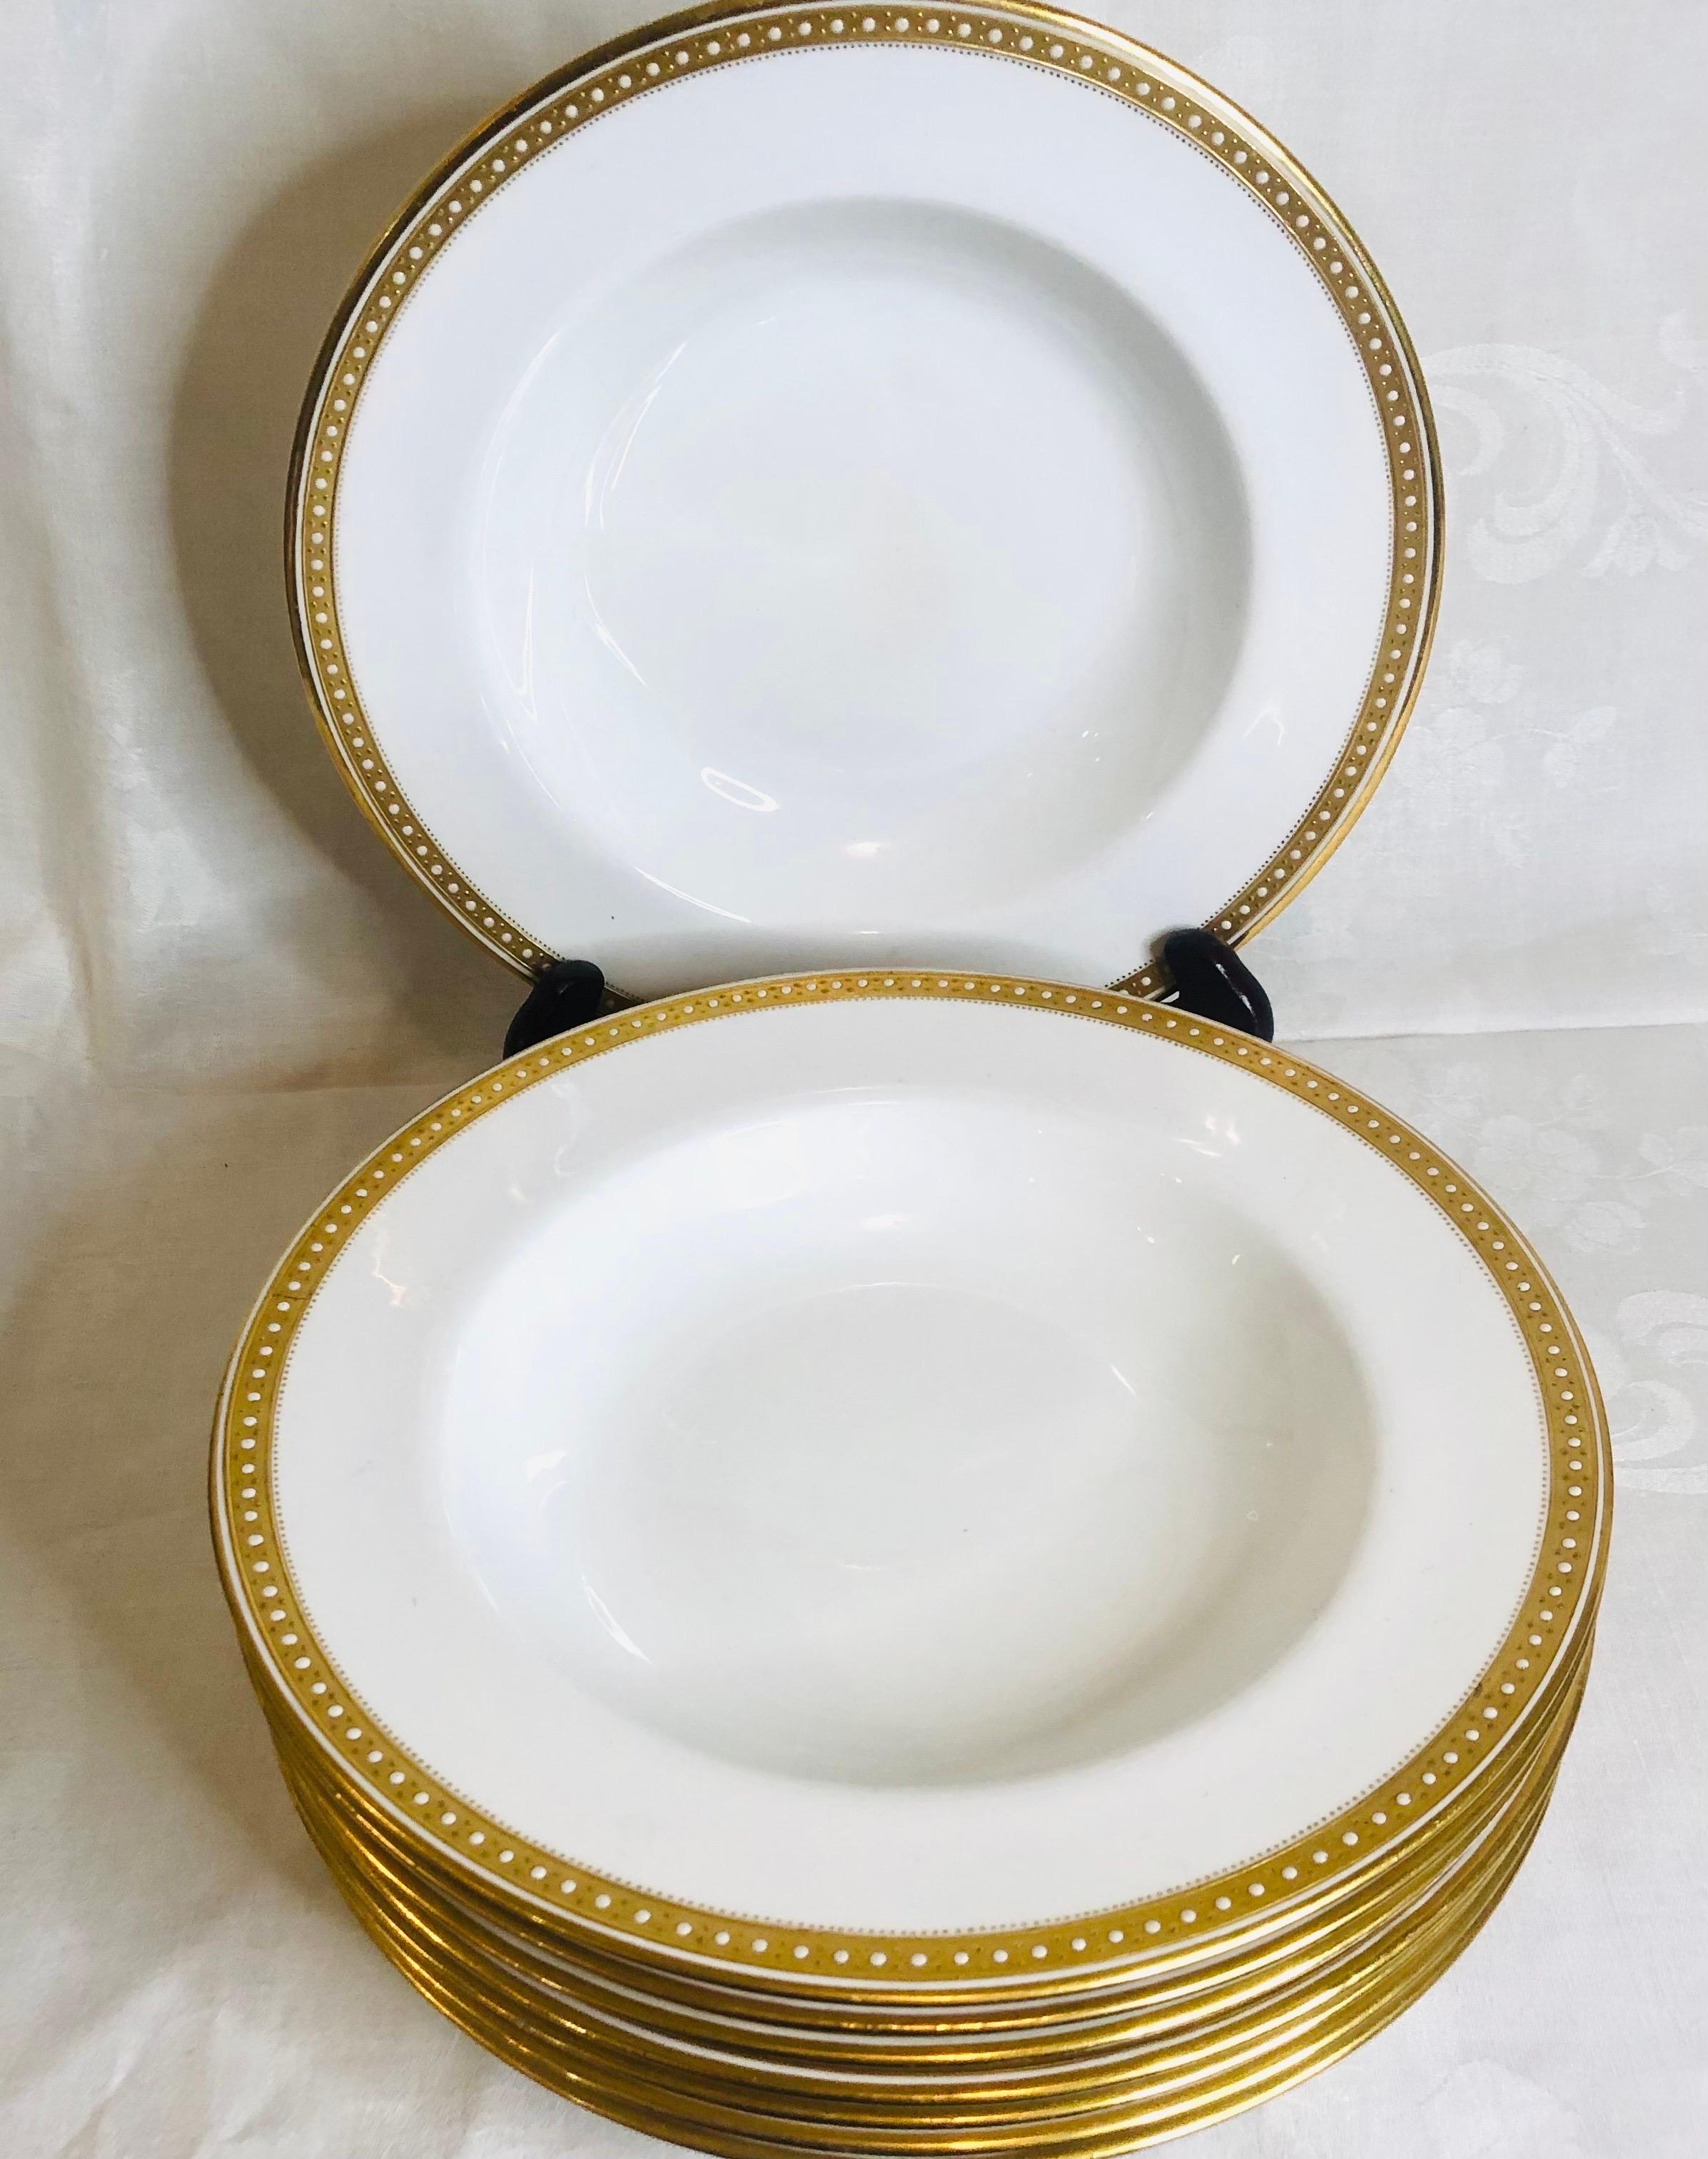 16 Copeland Spode Wide Rim Soups Made for T. Goode with Gold Border & Jeweling 1